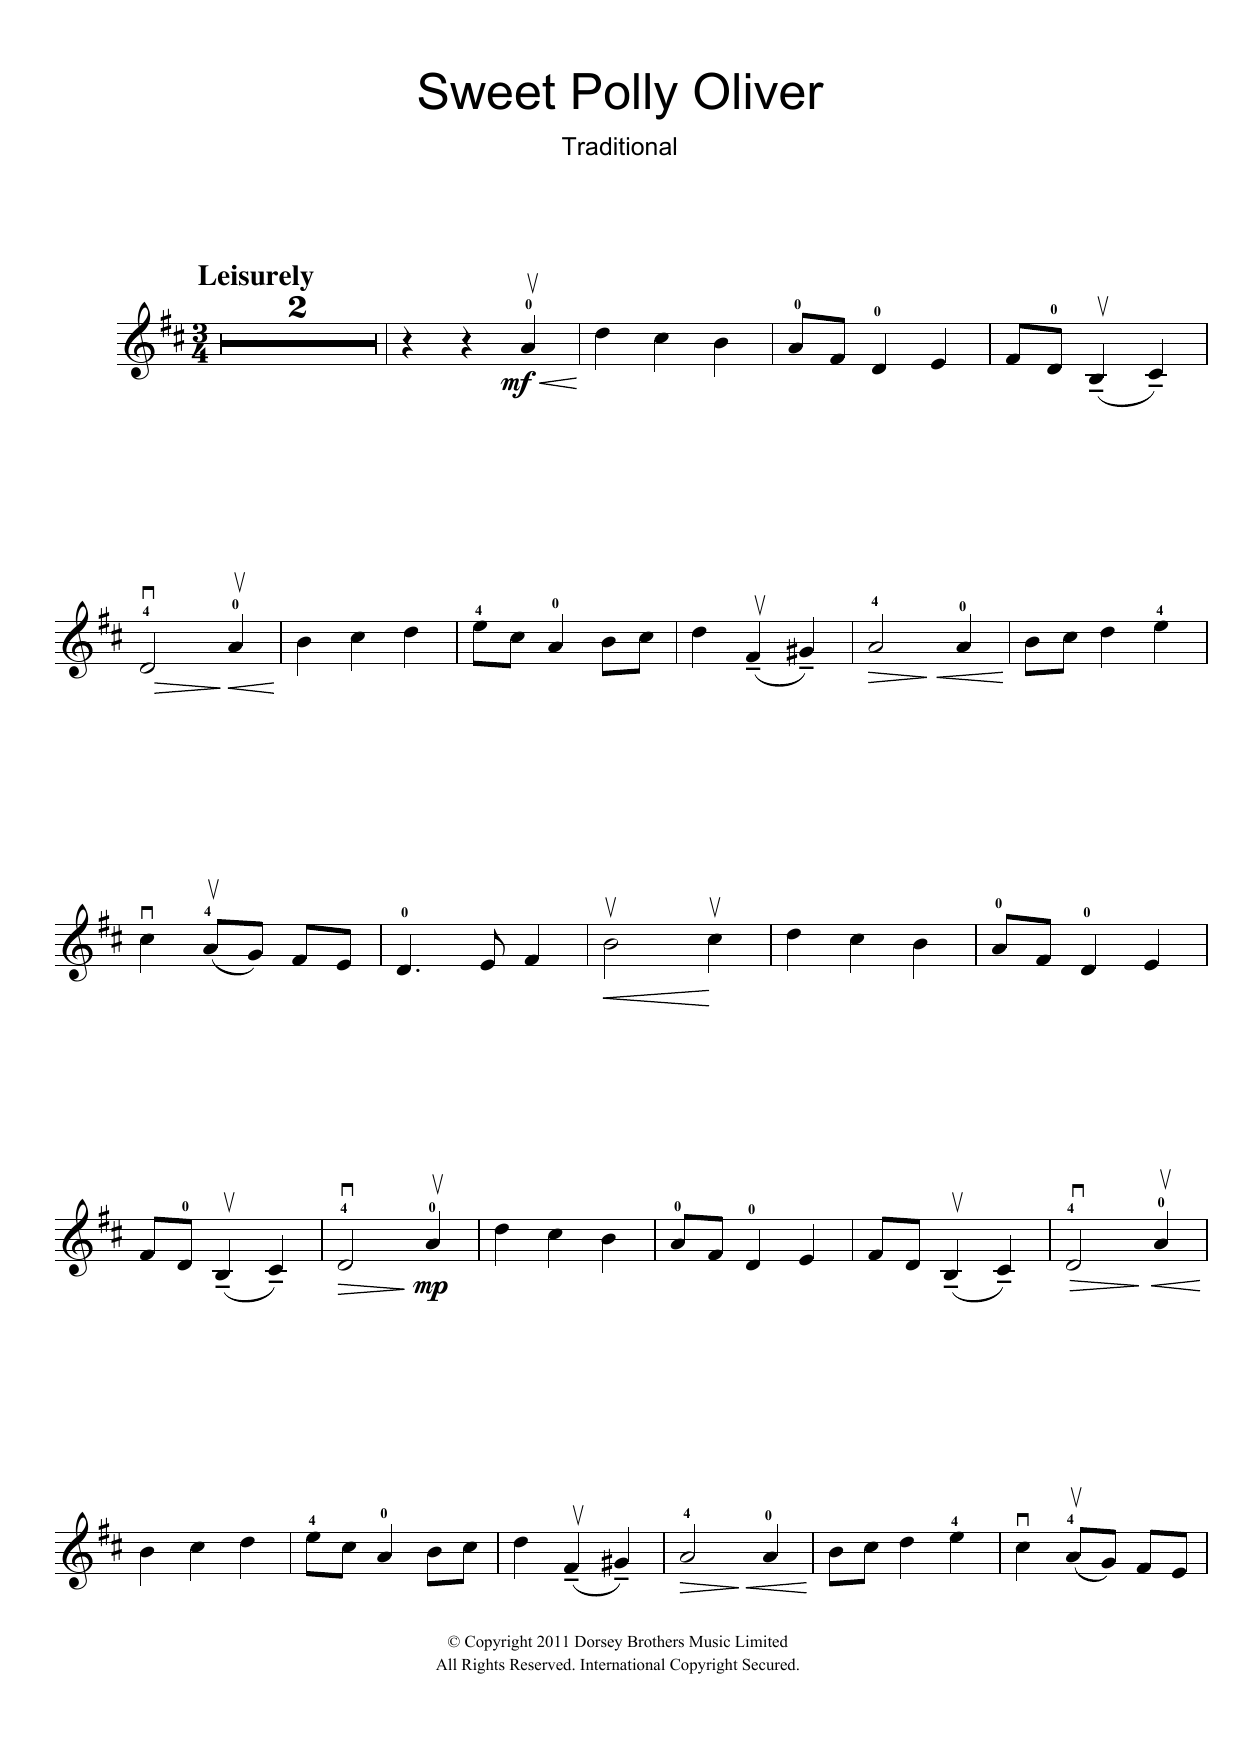 Download Traditional Sweet Polly Oliver Sheet Music